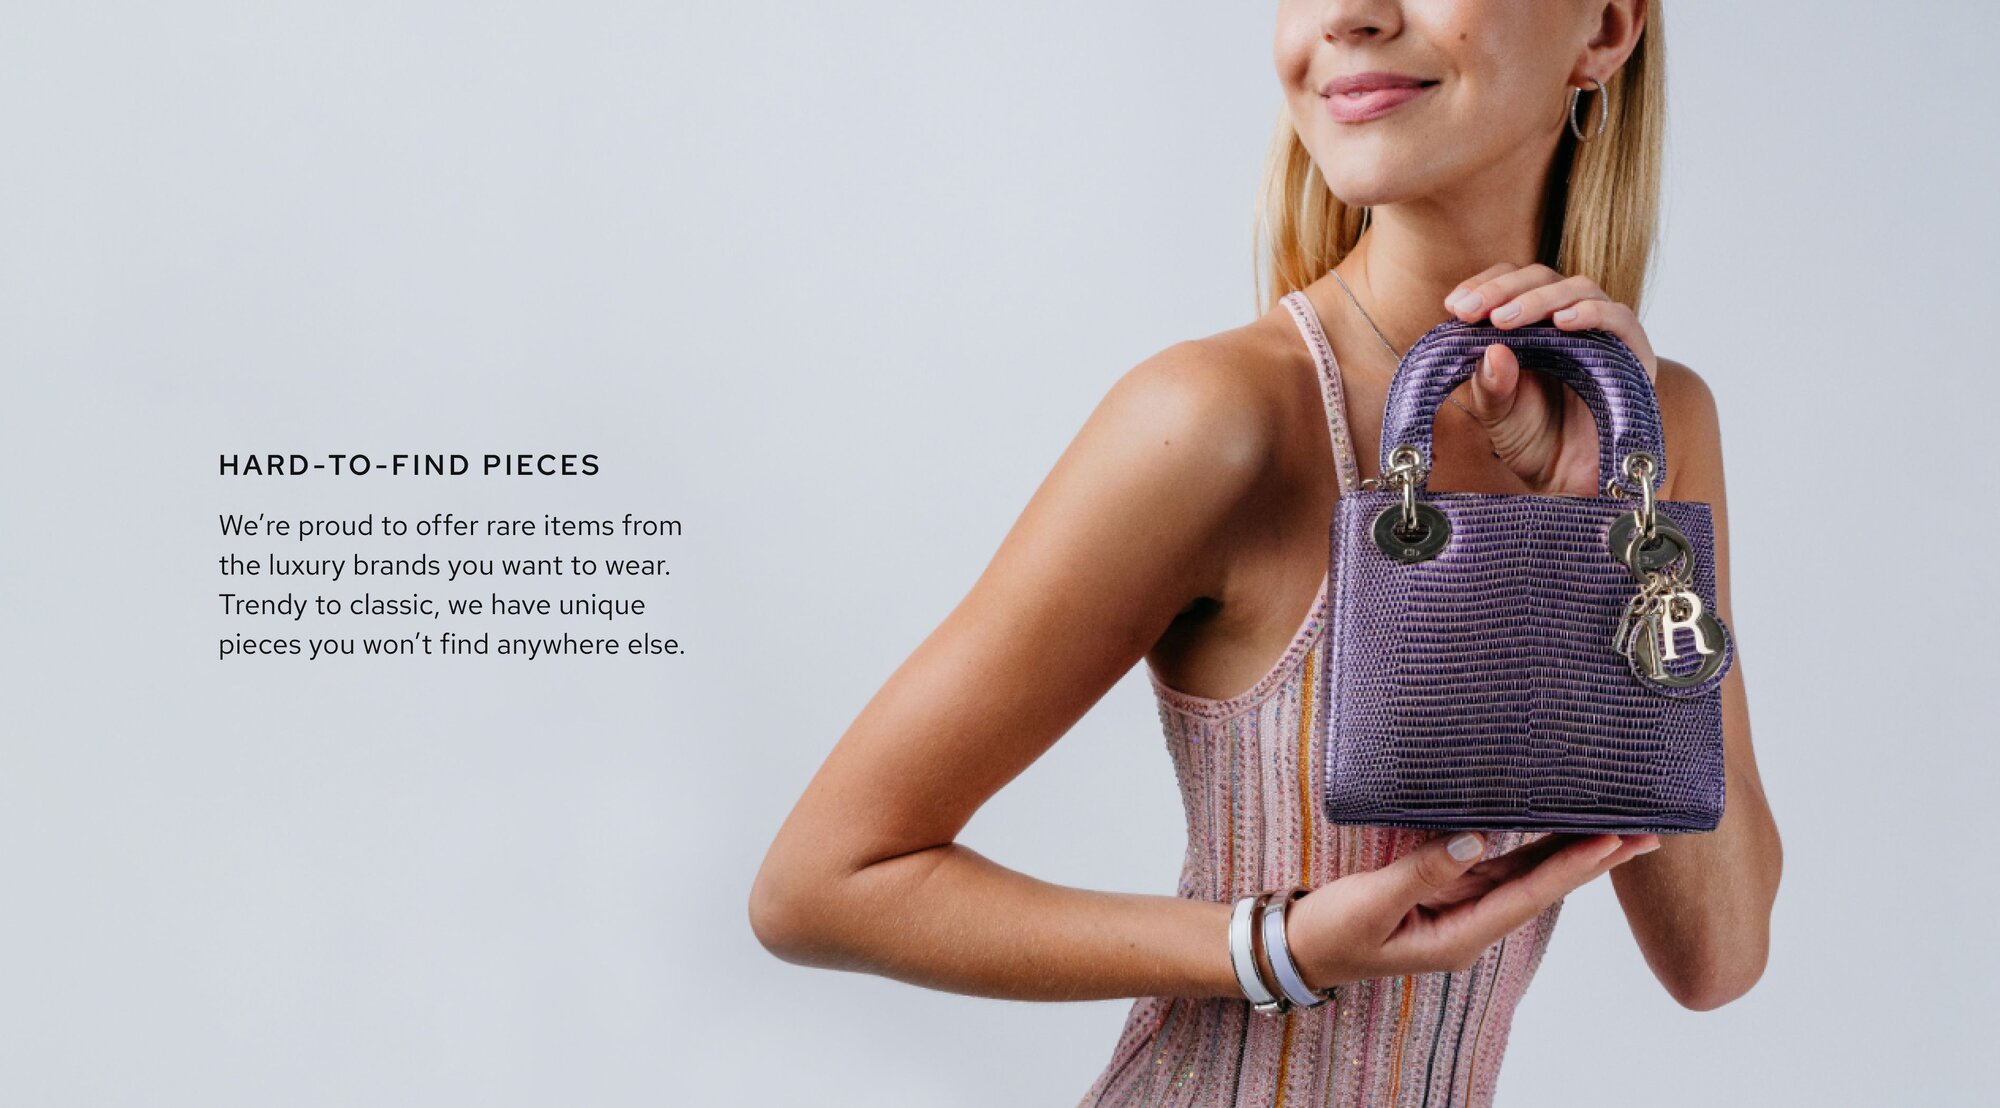 Photo of a woman wearing a dress, smiling, and holding a luxury handbag from Vivrelle. Text on image reads: "Hard-to-Find Pieces: We’re proud to offer rare items from the luxury brands you want to wear. Trendy to classic, we have unique pieces you won’t find anywhere else.”